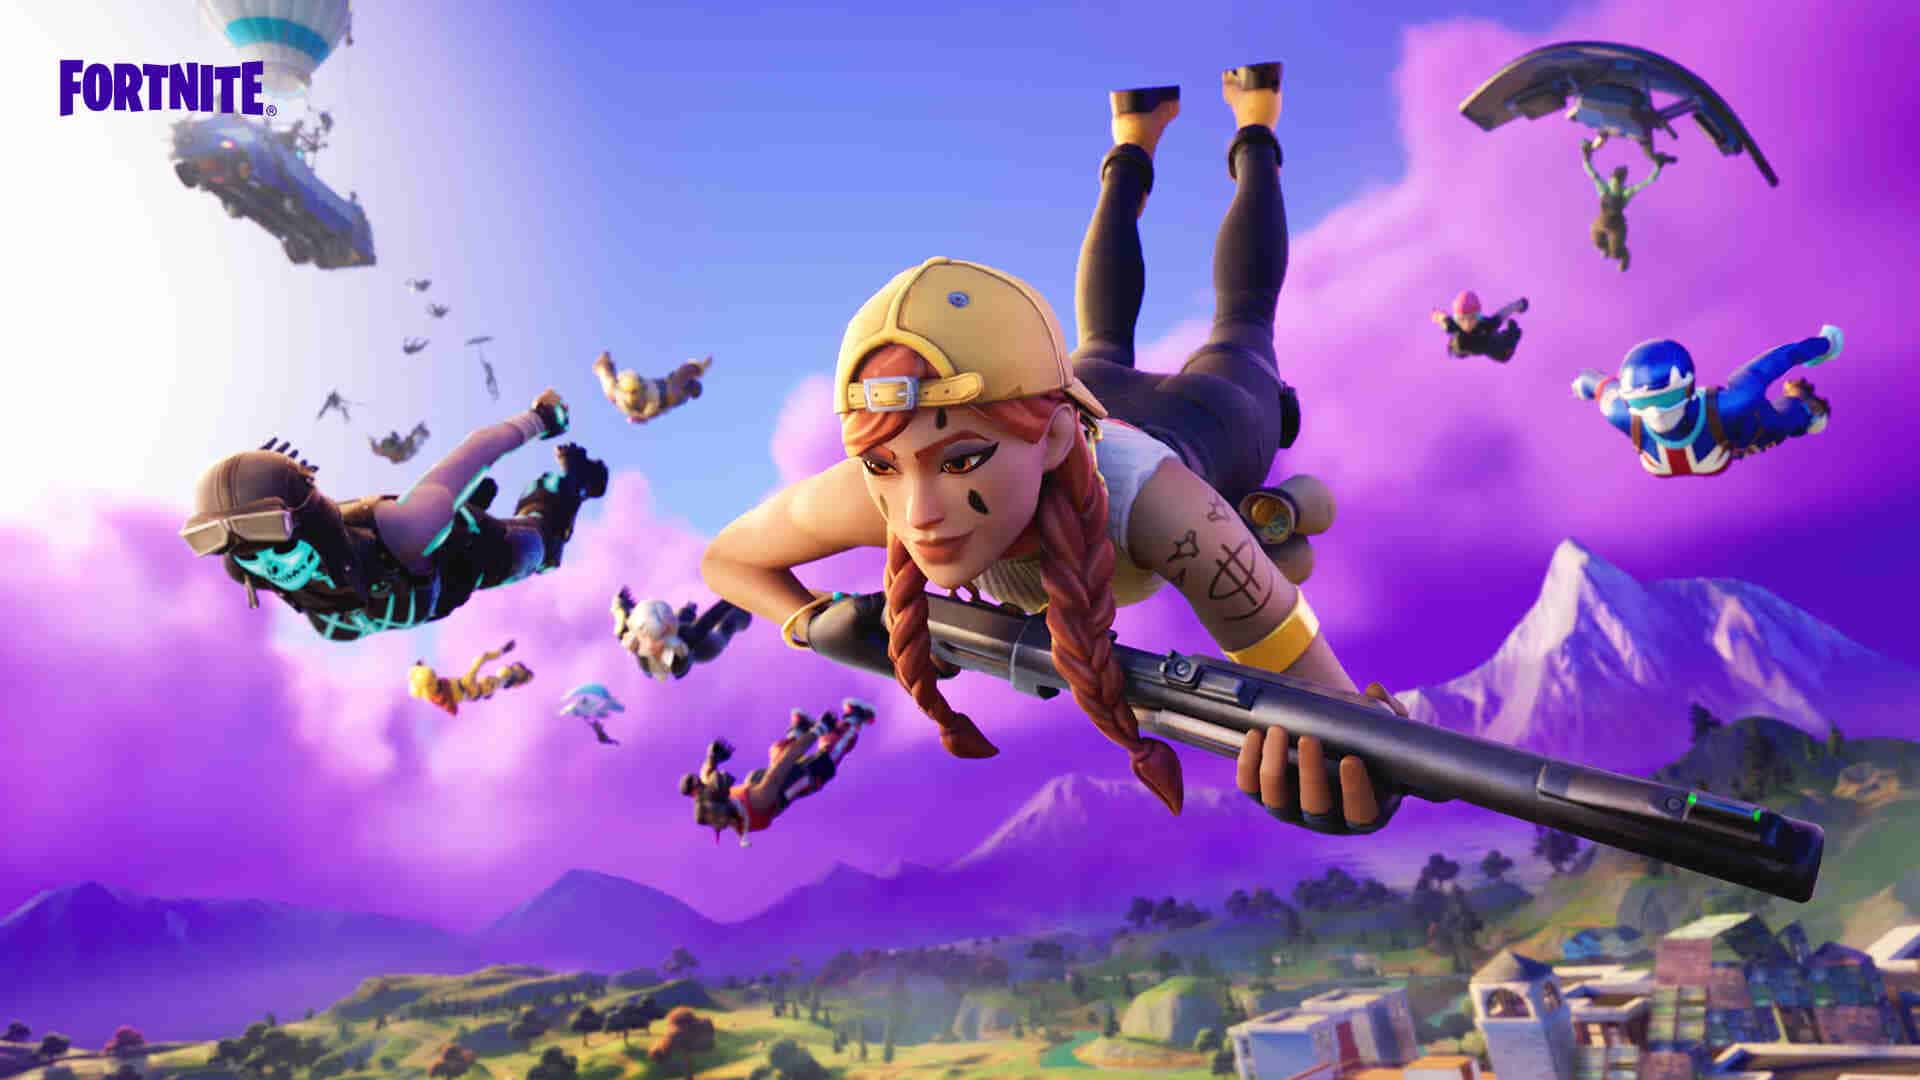 Is Fortnite cross-platform across PC, mobile, and consoles